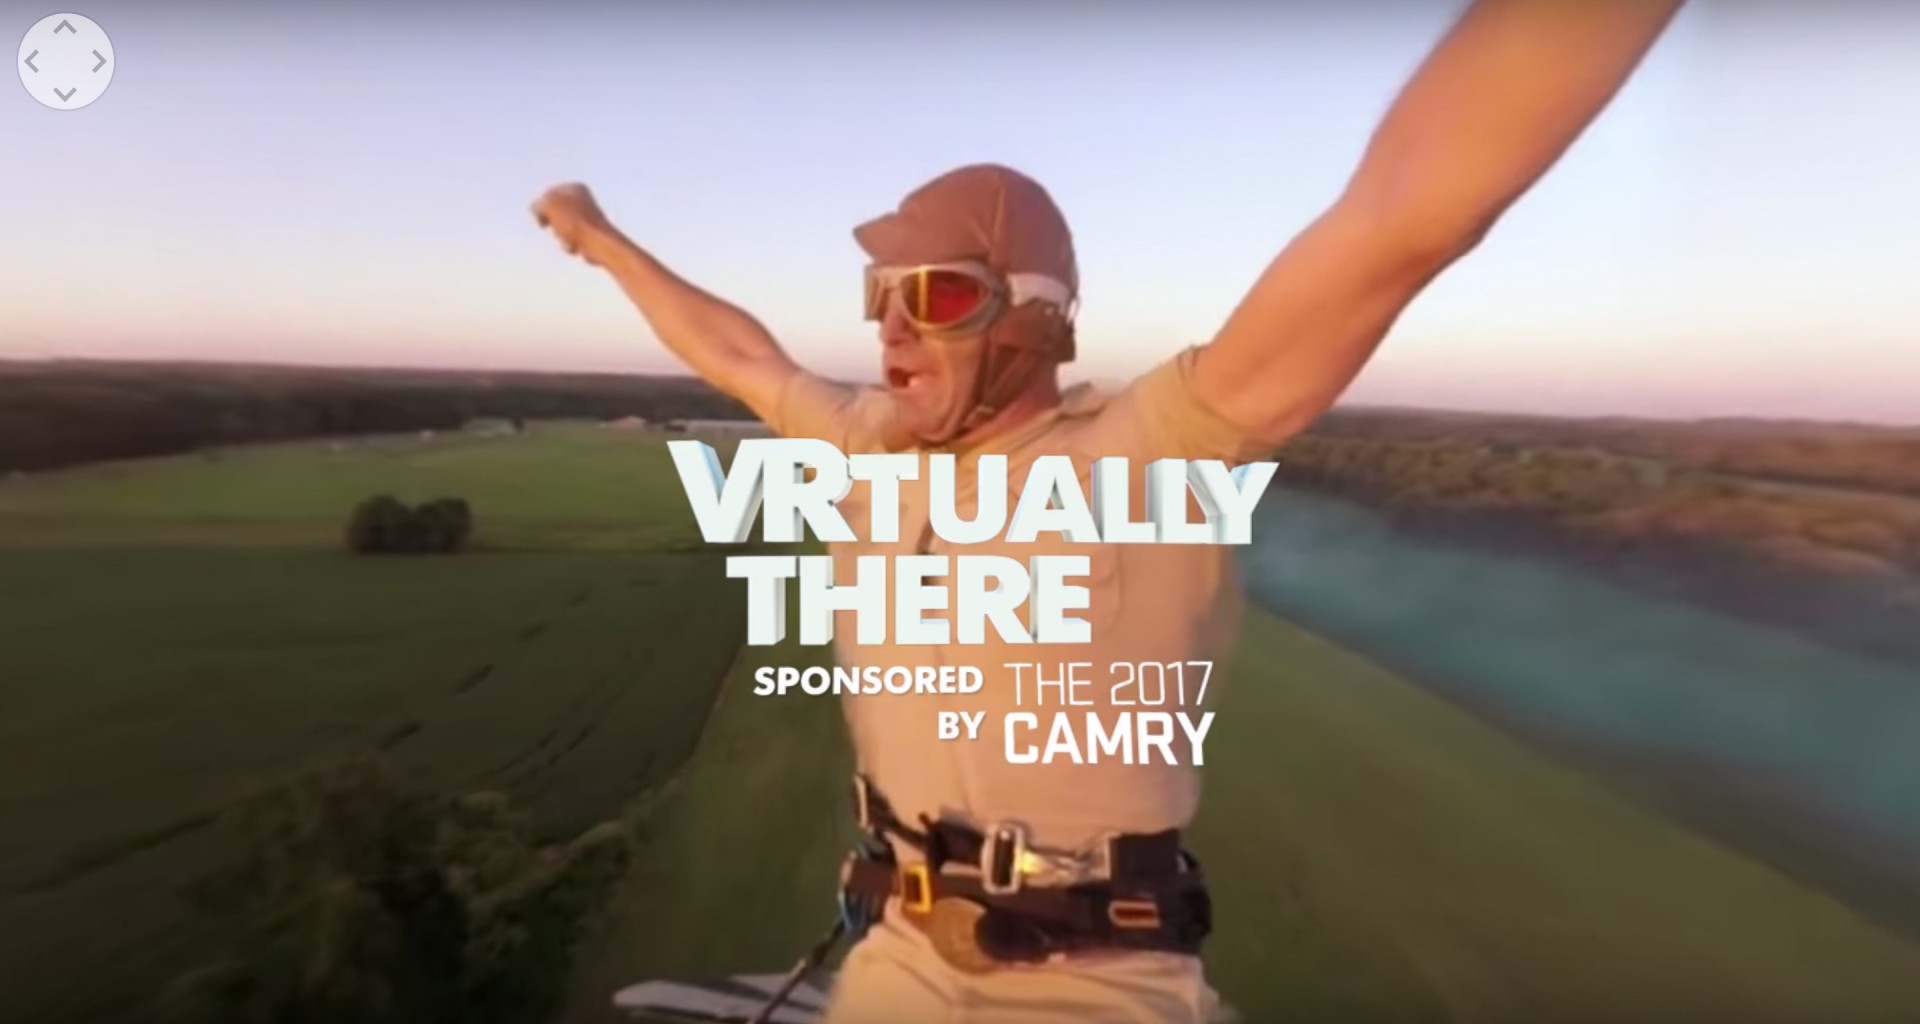 USA Today launches weekly VR news series “VRtually There” with new “cubemercial” format for advertisers